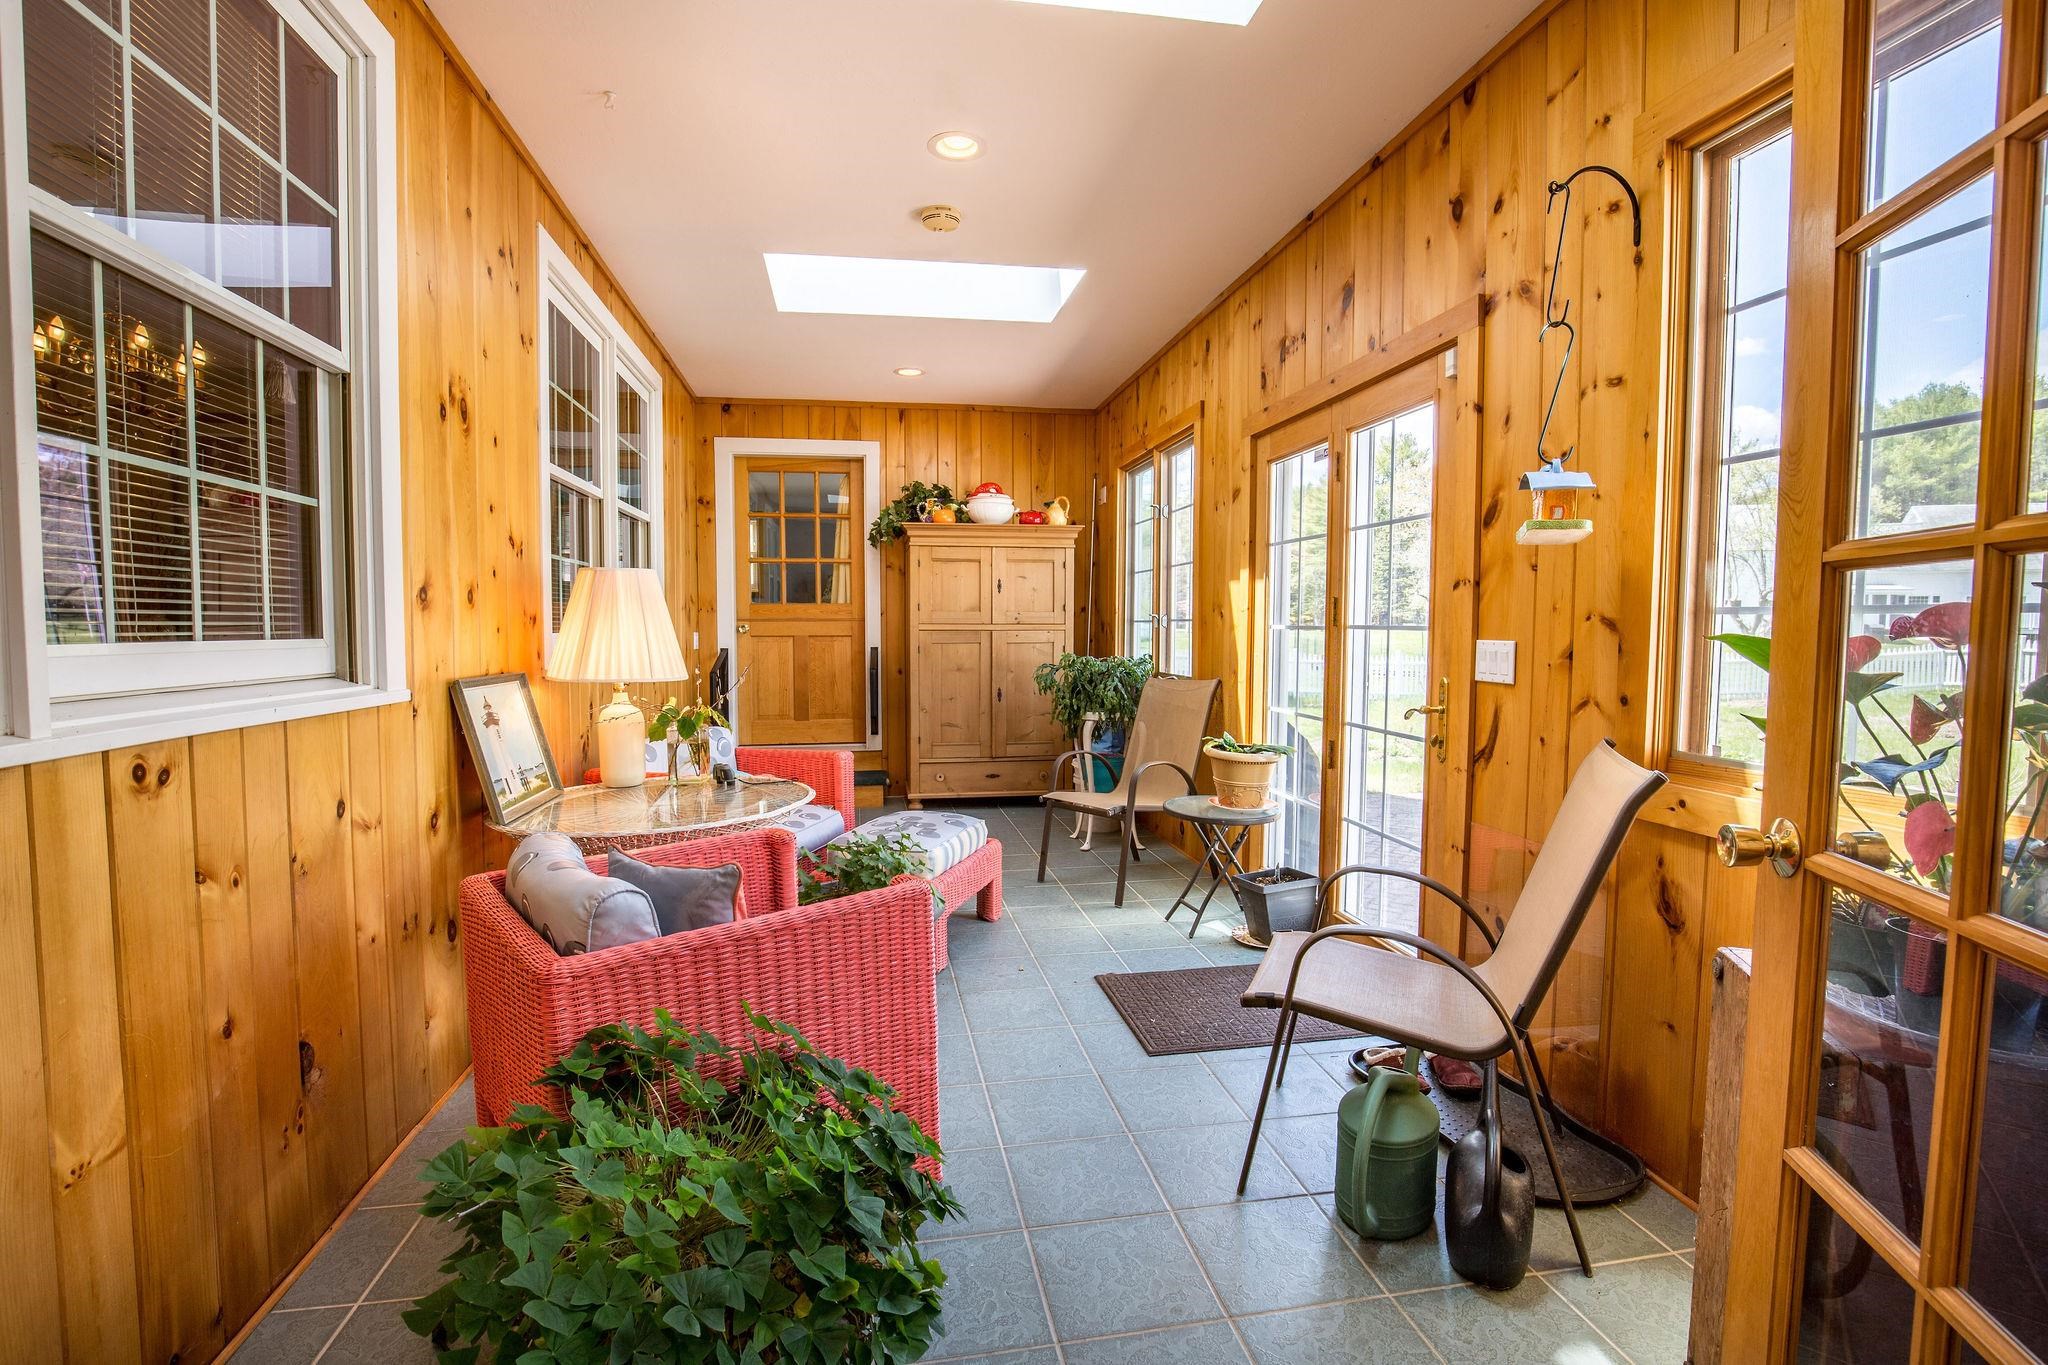 Four season heated porch. Doors lead to outside patio.